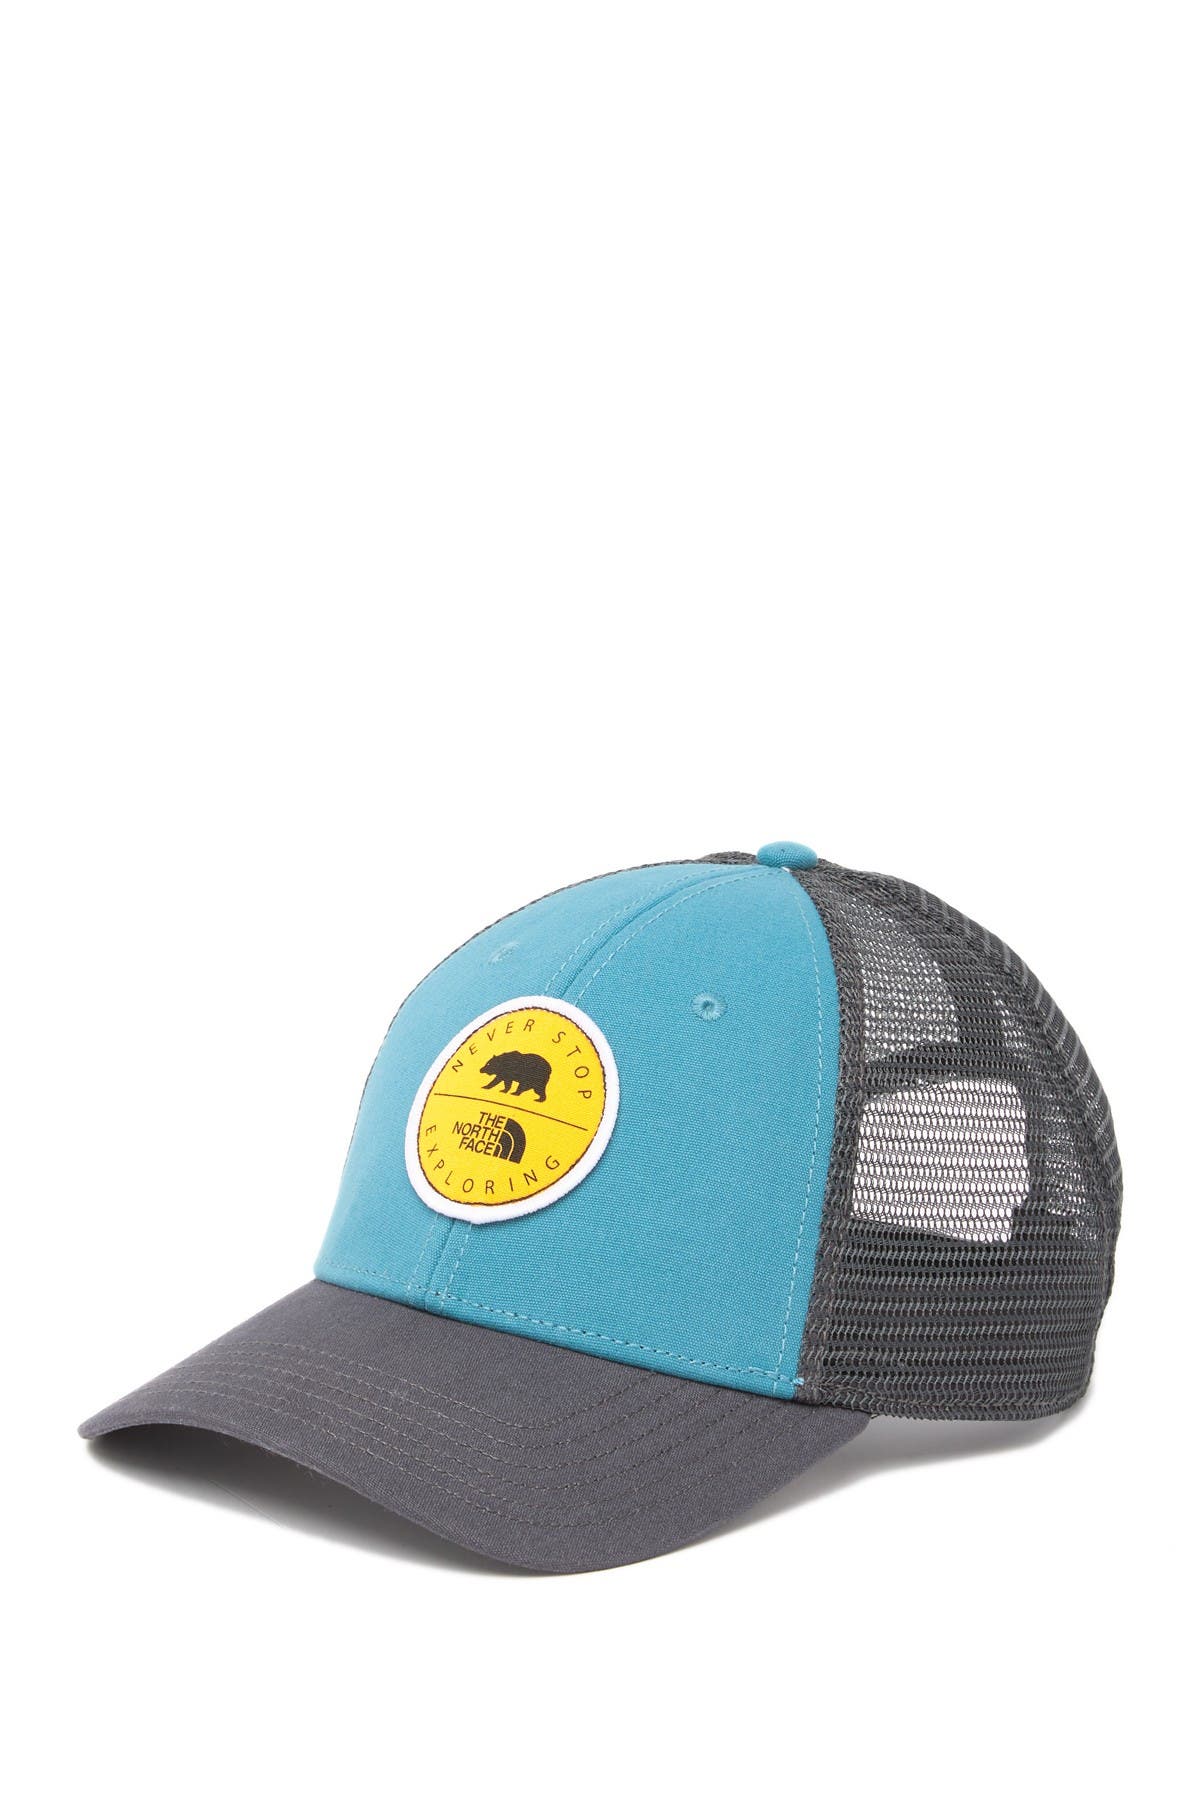 north face patches trucker hat